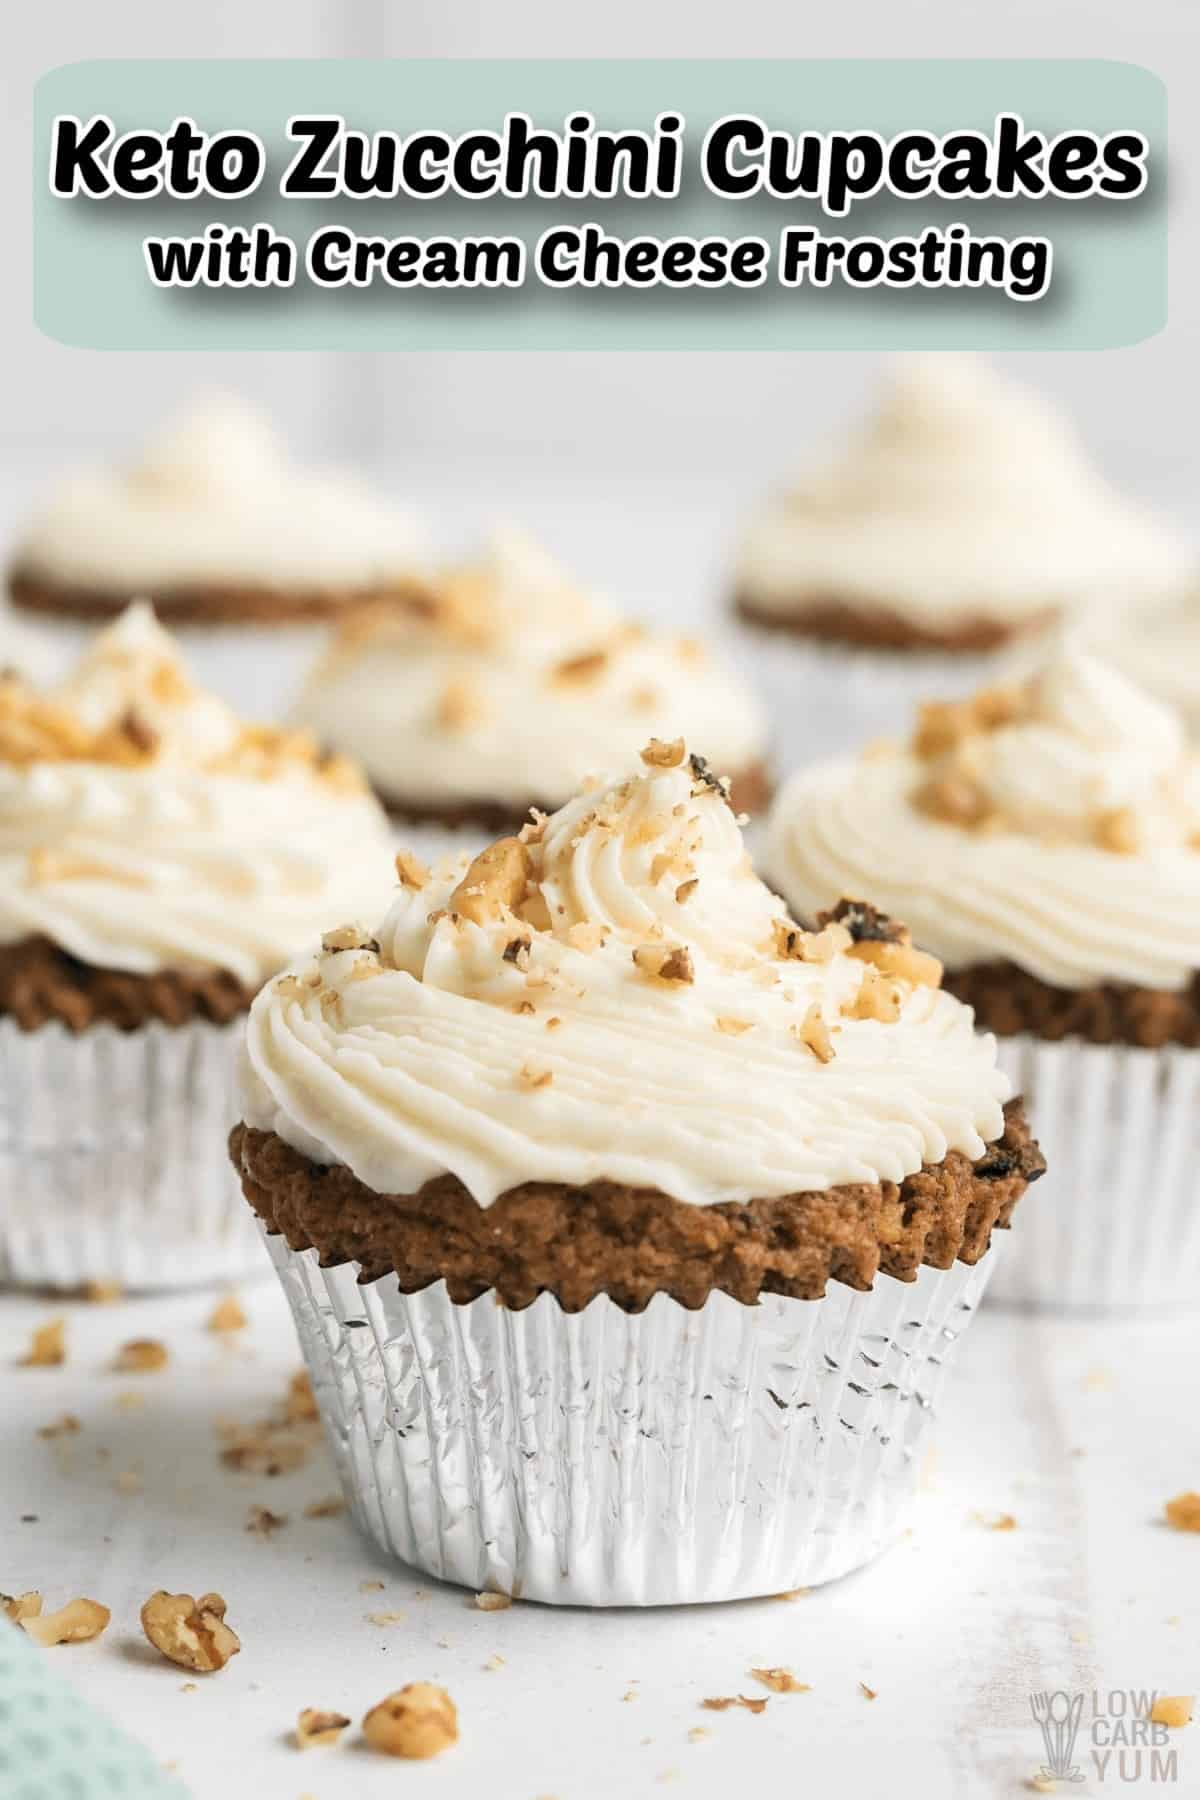 keto zucchini cupcakes with cream cheese frosting pintrest image